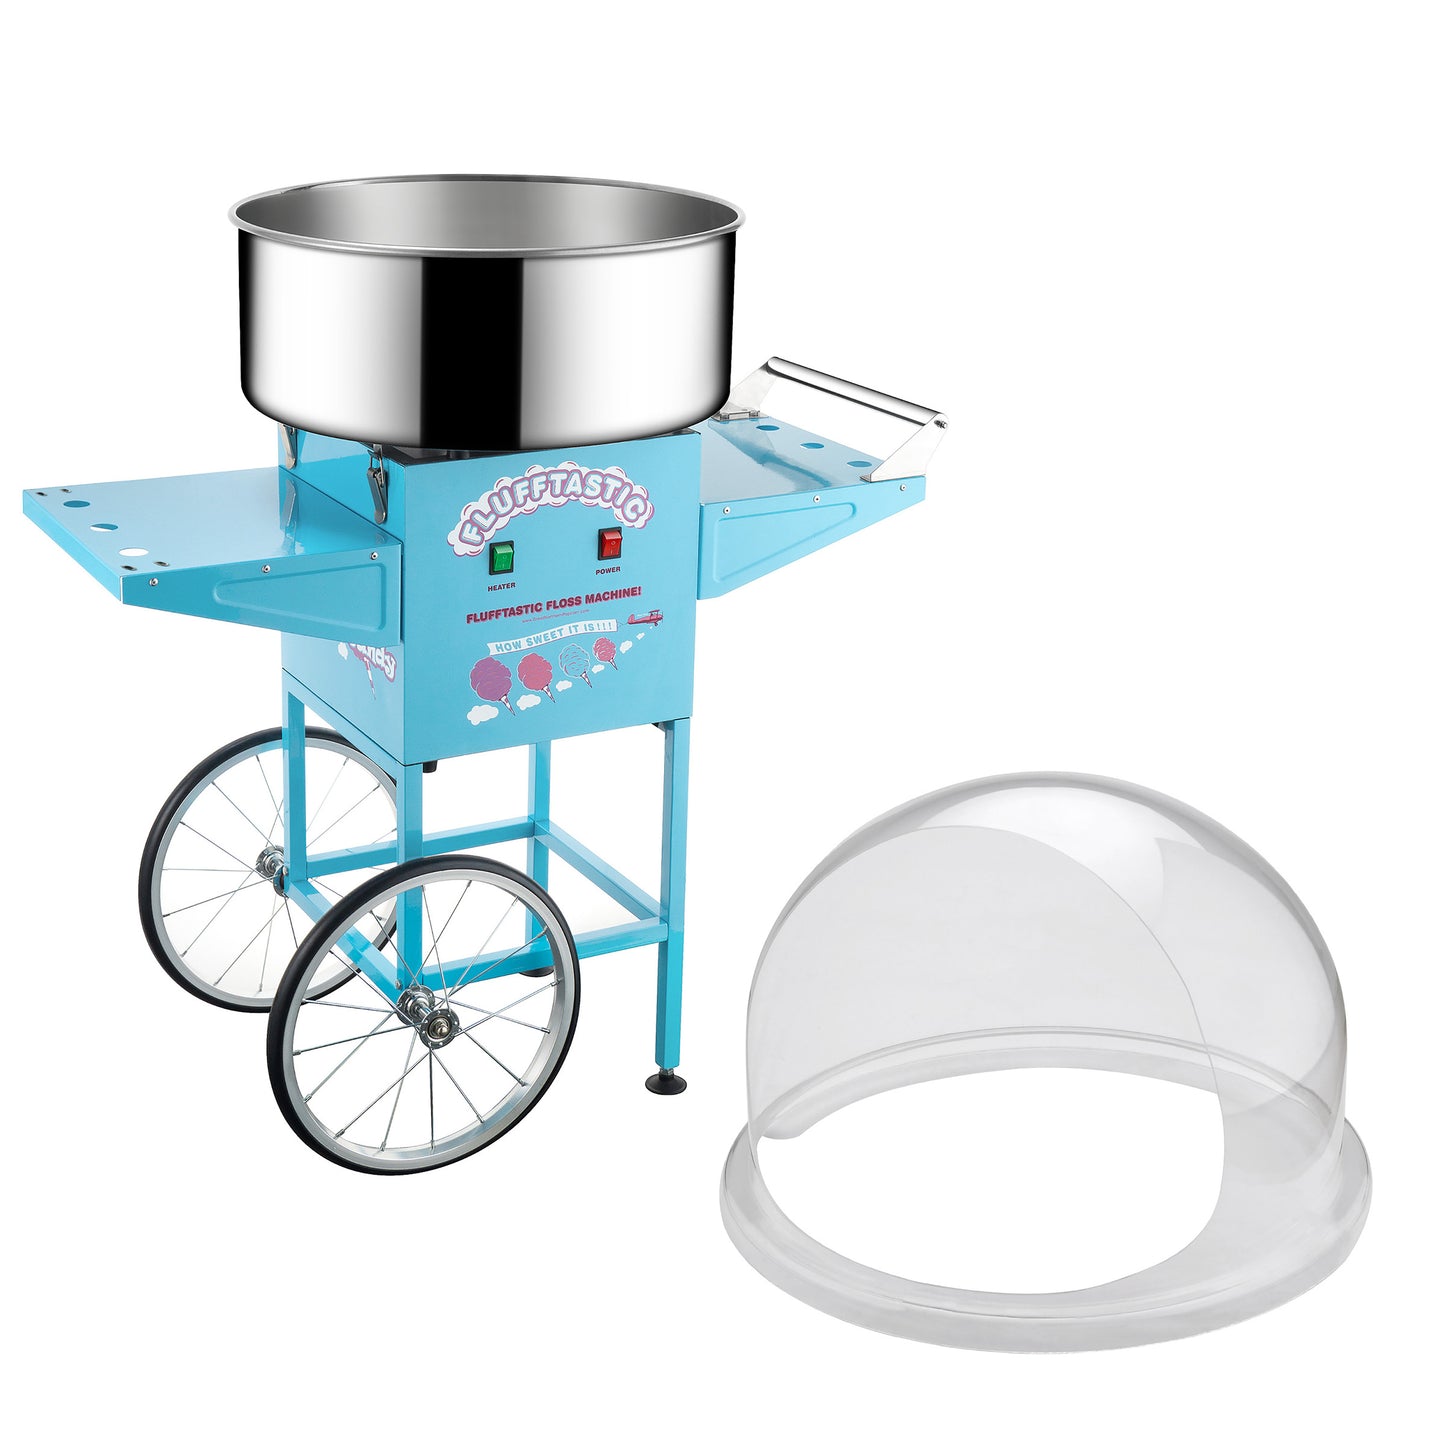 Flufftastic Cotton Candy Machine, Cart and Bubble Shield - Blue